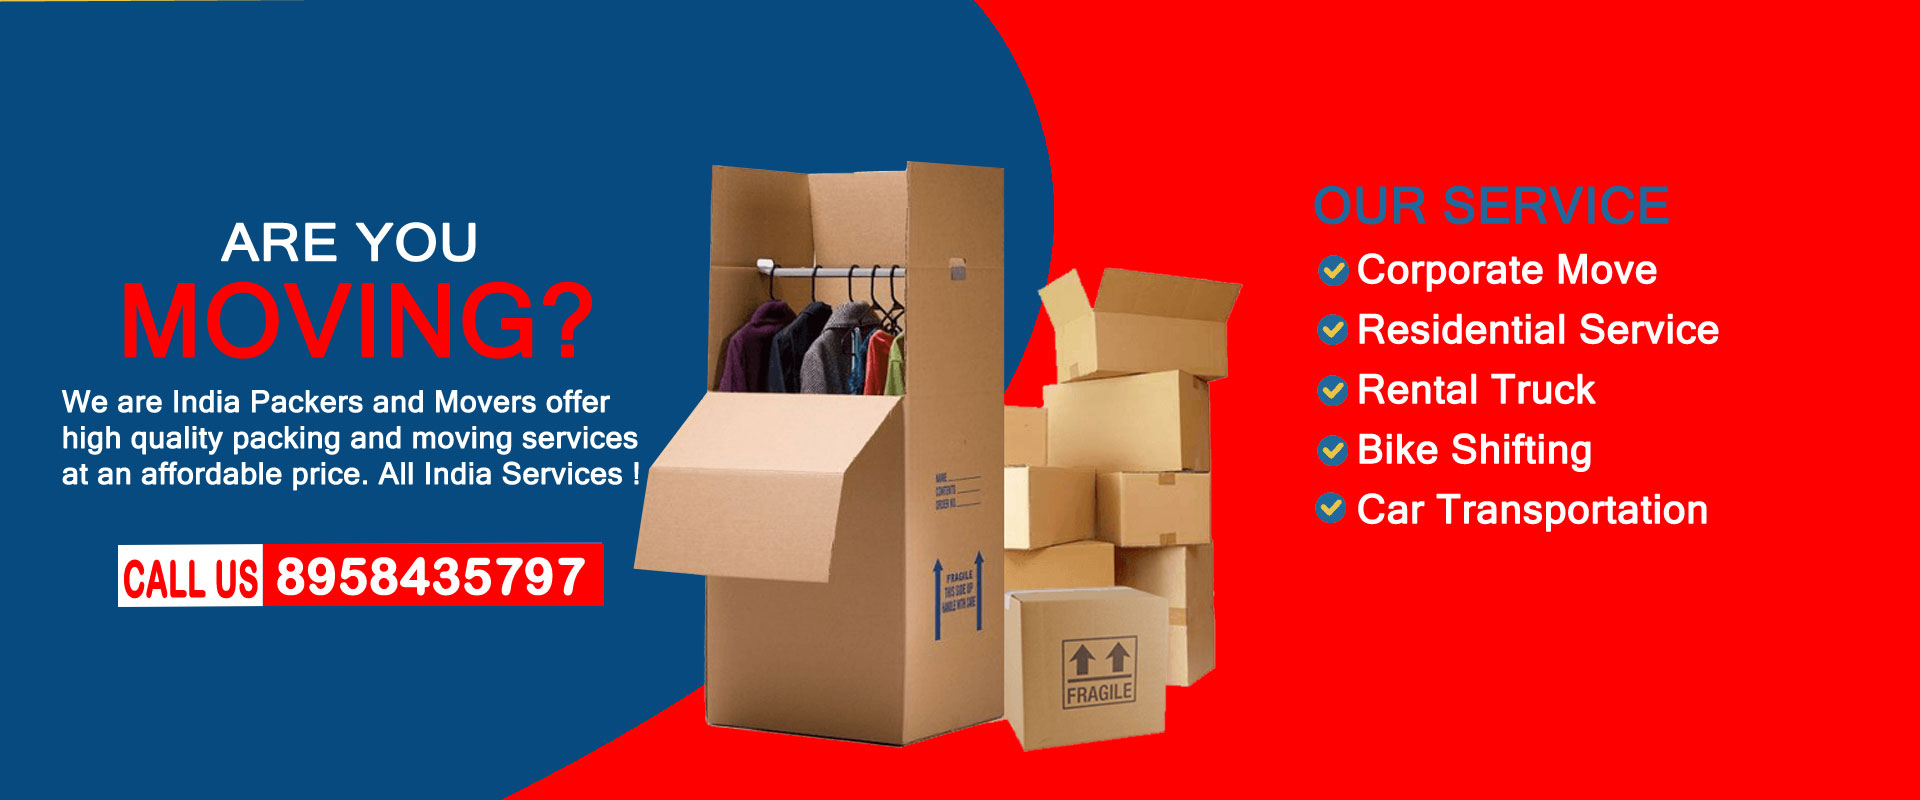 India Packers and Movers Banner